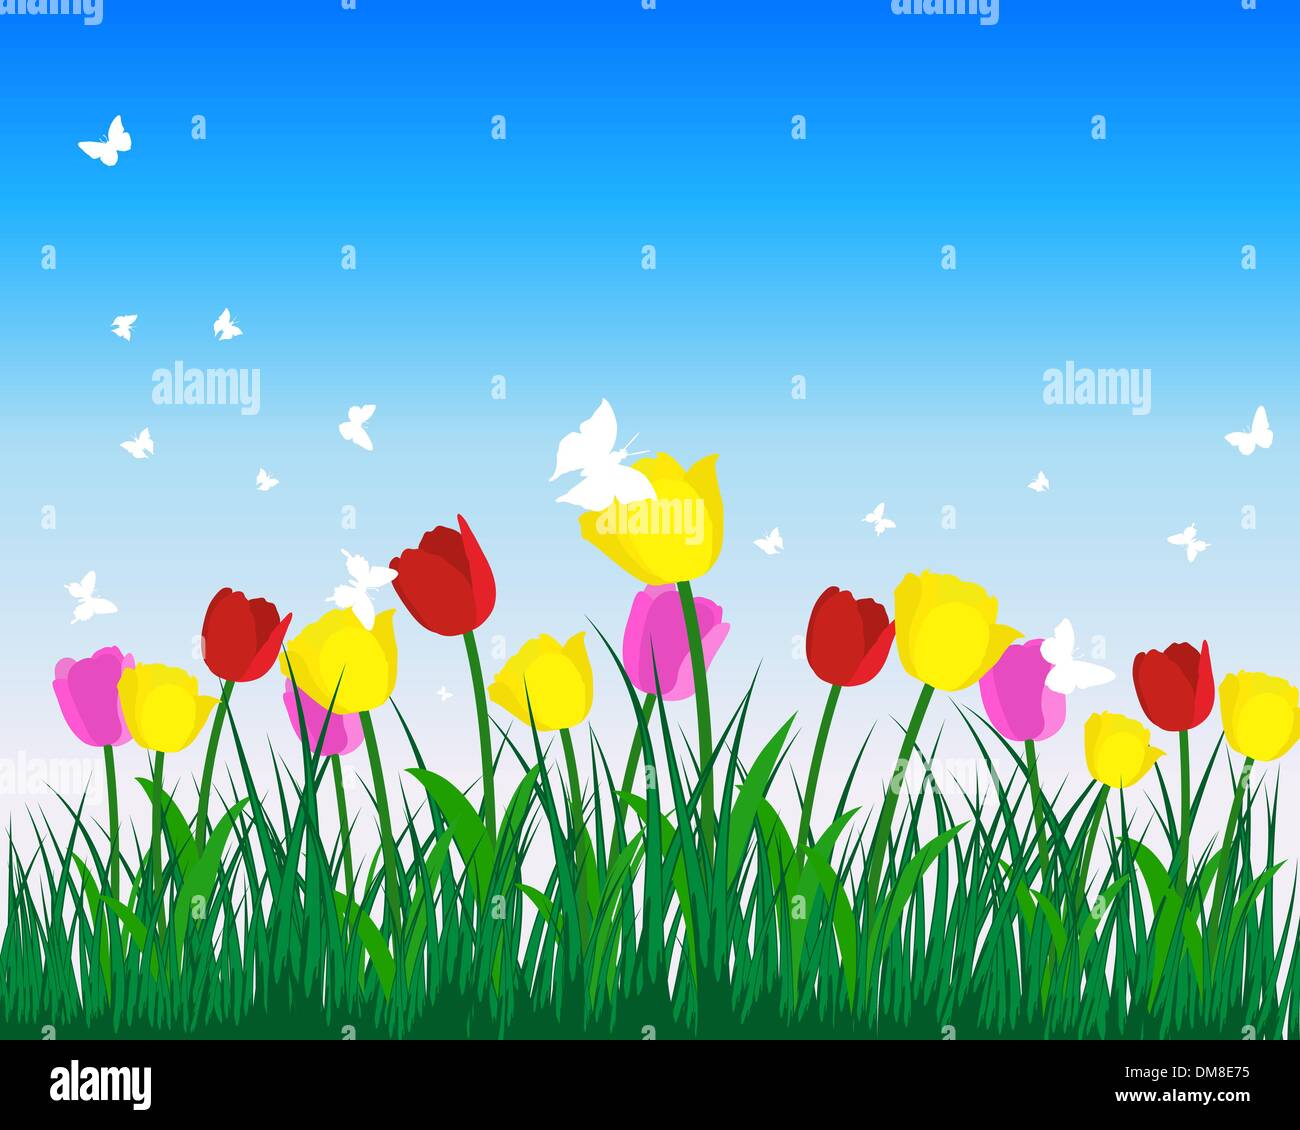 dialing clipart of flowers